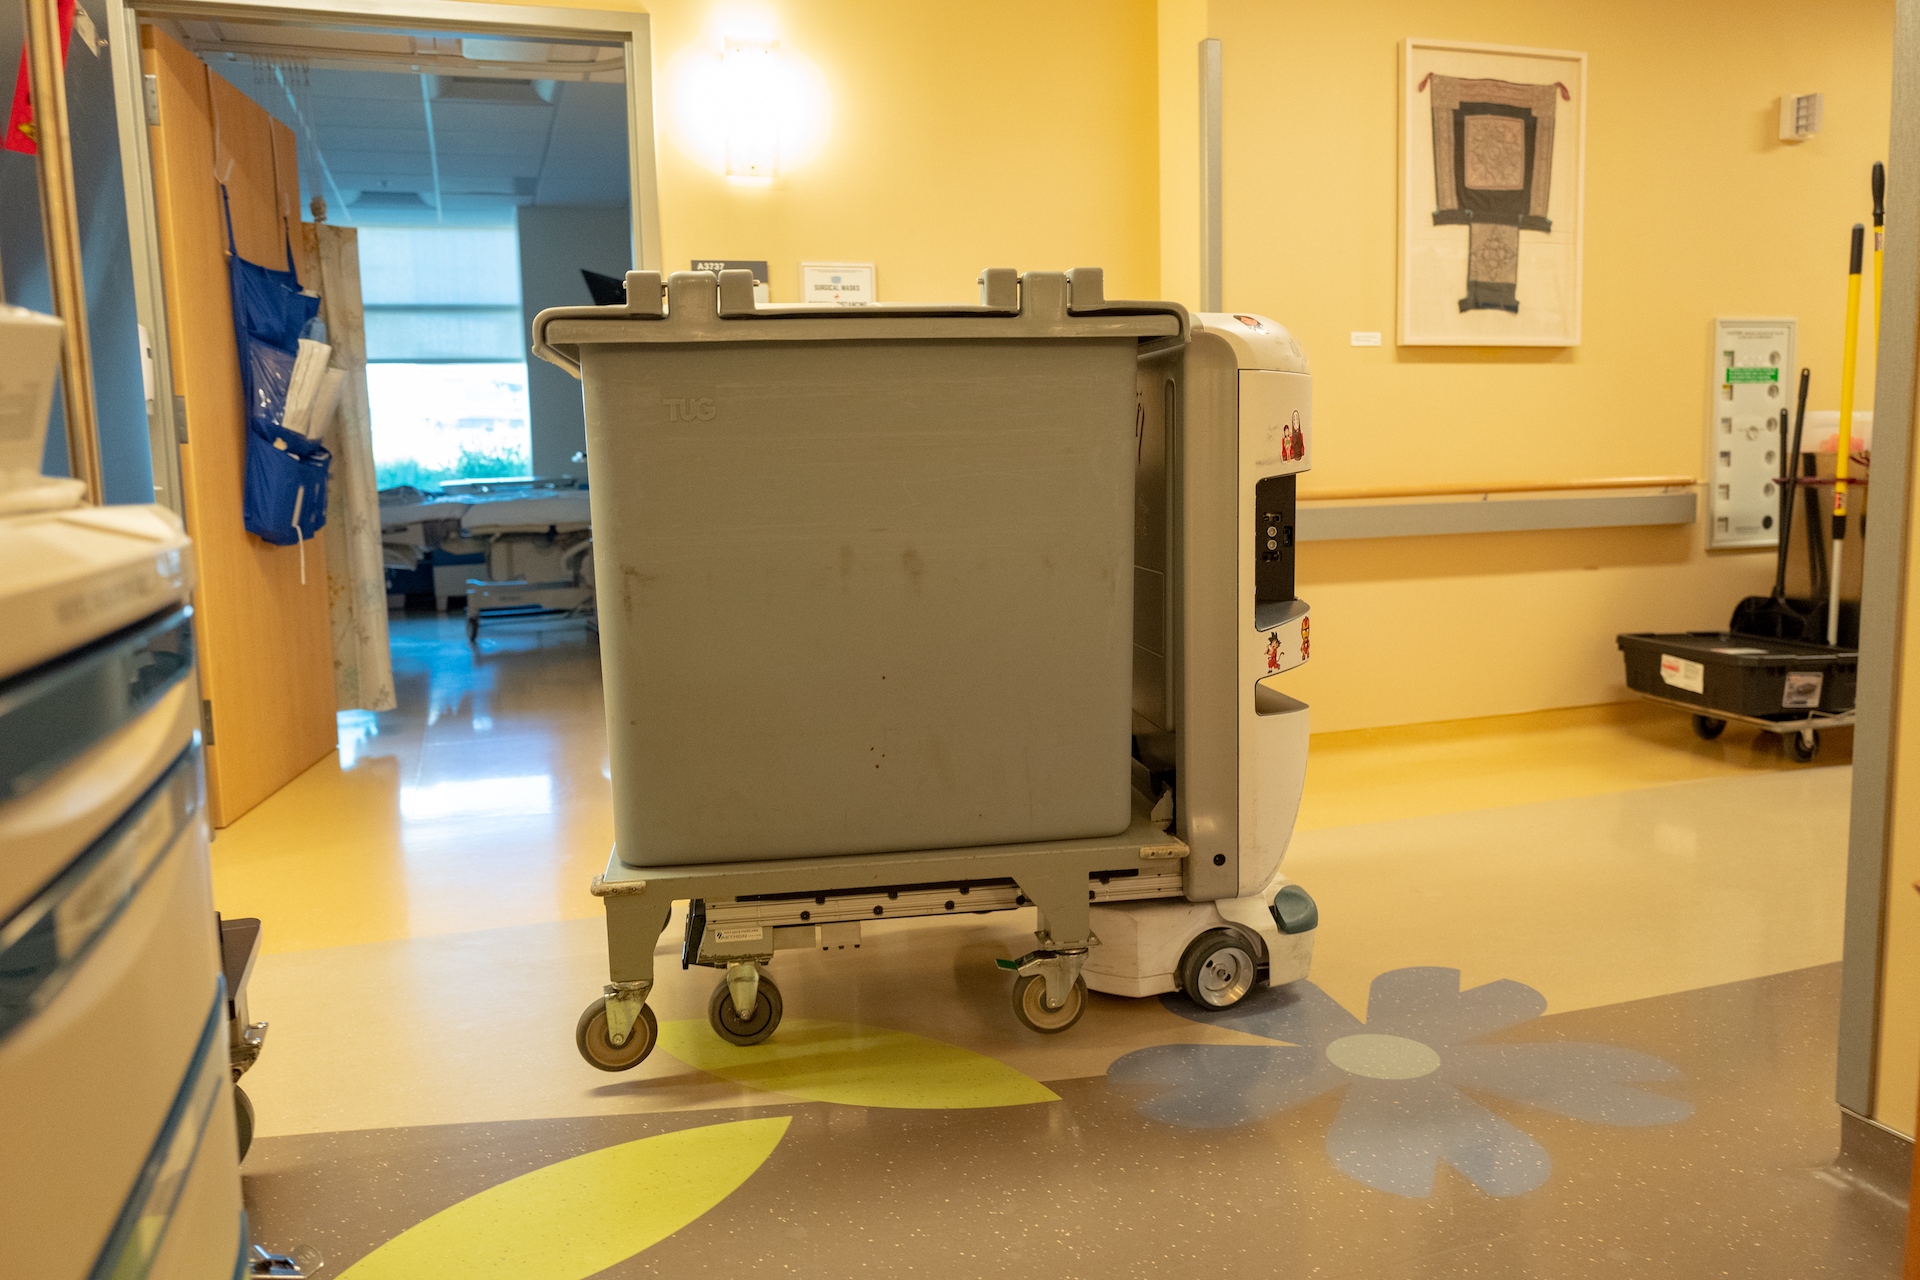 diskret Yoghurt Mysterium Hospital hallway robots get patches for potentially serious bugs |  CyberScoop